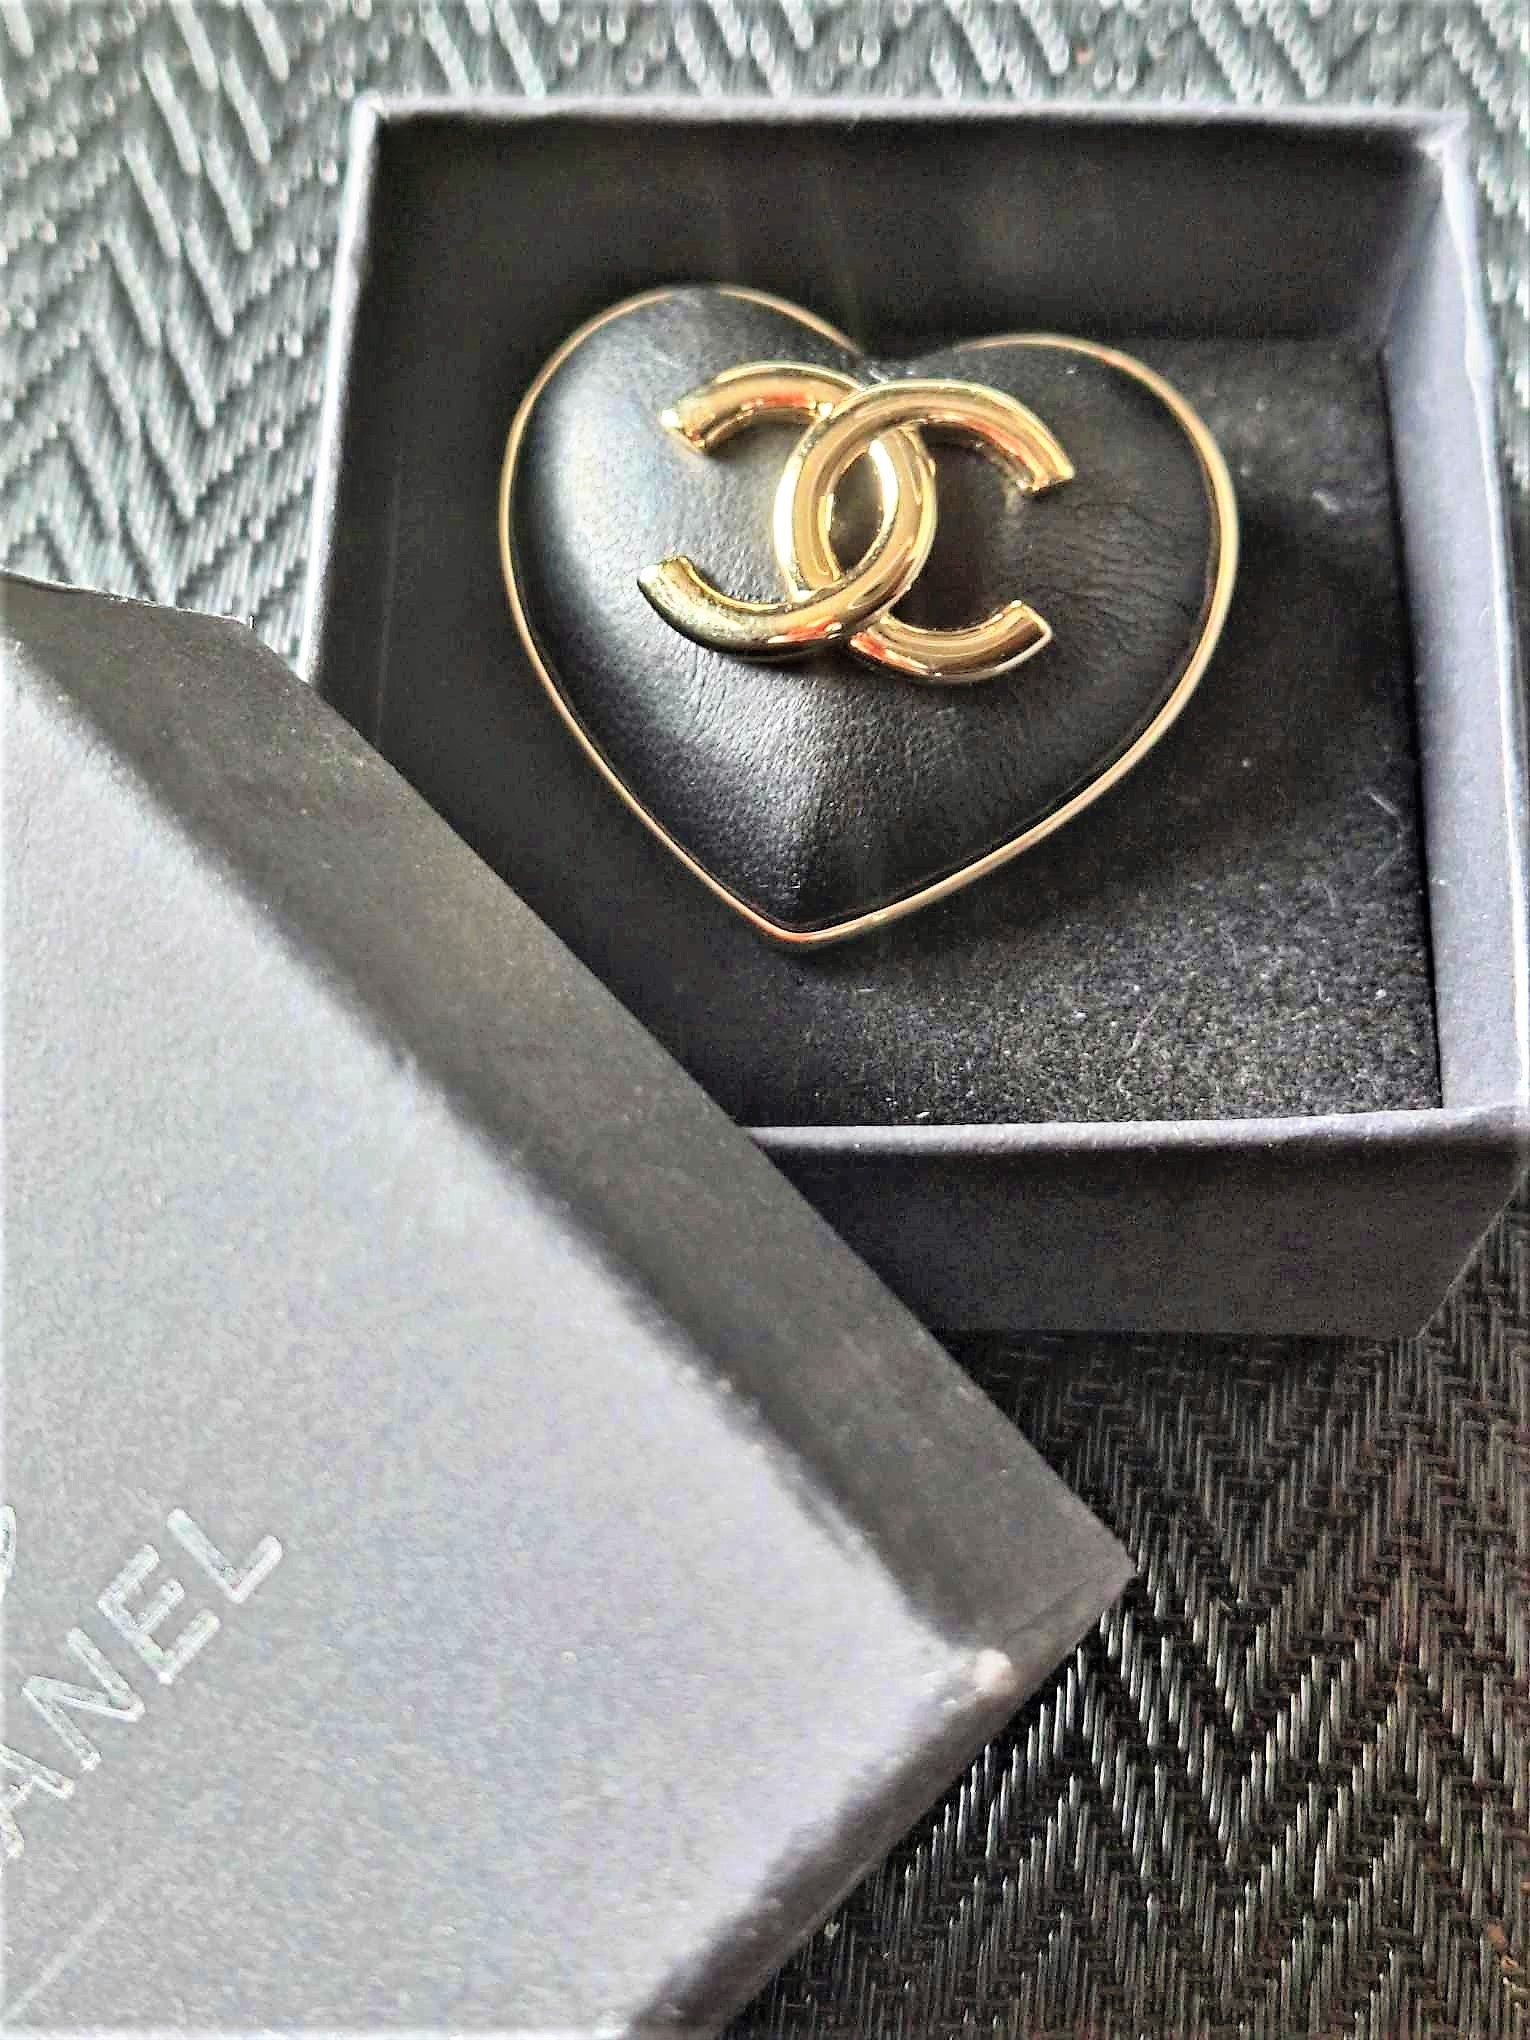 Buy Vintage Brooch Chanel Online In India -  India